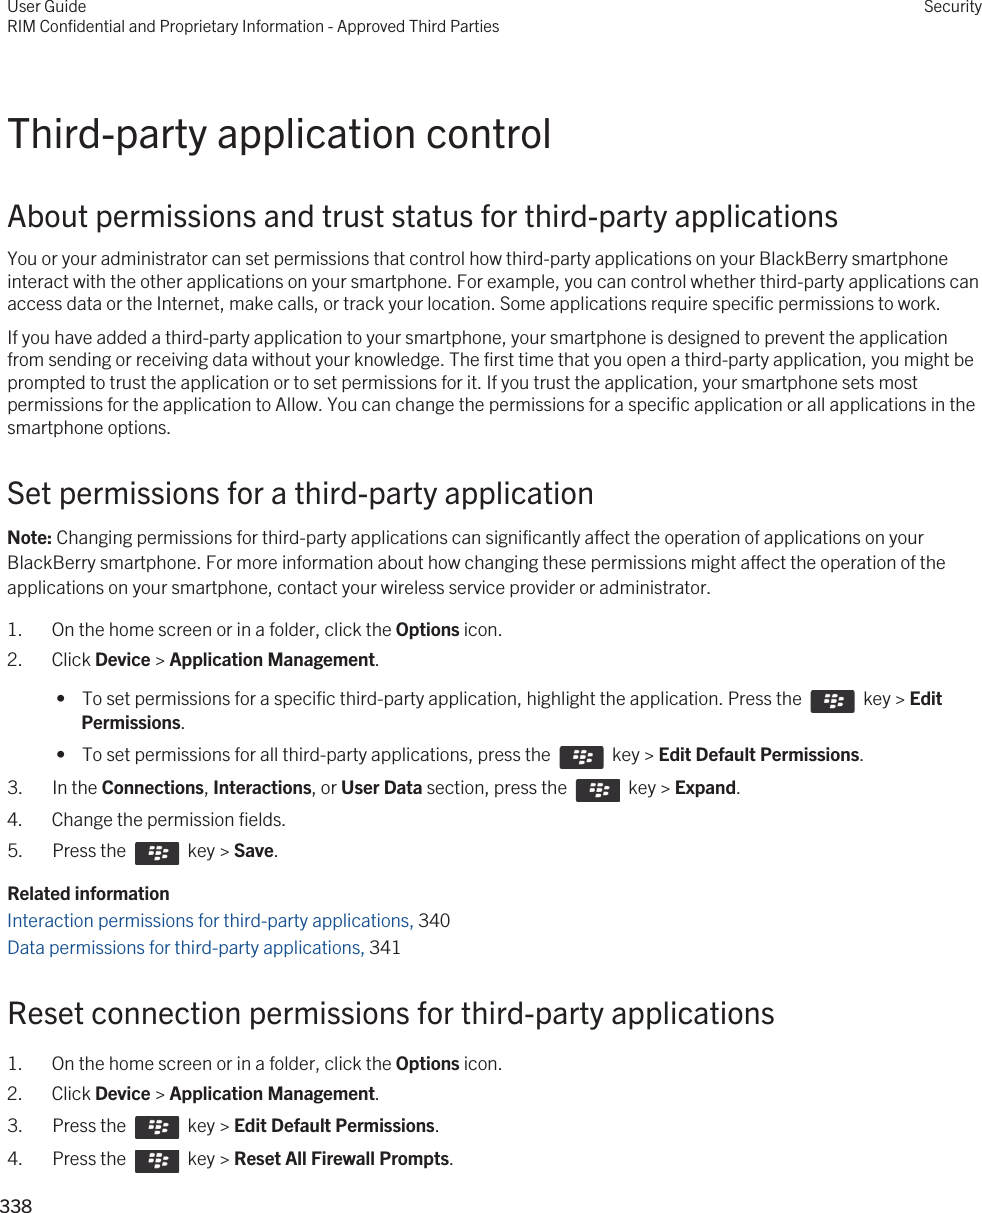 Third-party application controlAbout permissions and trust status for third-party applicationsYou or your administrator can set permissions that control how third-party applications on your BlackBerry smartphone interact with the other applications on your smartphone. For example, you can control whether third-party applications can access data or the Internet, make calls, or track your location. Some applications require specific permissions to work.If you have added a third-party application to your smartphone, your smartphone is designed to prevent the application from sending or receiving data without your knowledge. The first time that you open a third-party application, you might be prompted to trust the application or to set permissions for it. If you trust the application, your smartphone sets most permissions for the application to Allow. You can change the permissions for a specific application or all applications in the smartphone options.Set permissions for a third-party applicationNote: Changing permissions for third-party applications can significantly affect the operation of applications on your BlackBerry smartphone. For more information about how changing these permissions might affect the operation of the applications on your smartphone, contact your wireless service provider or administrator.1. On the home screen or in a folder, click the Options icon.2. Click Device &gt; Application Management. •  To set permissions for a specific third-party application, highlight the application. Press the    key &gt; Edit Permissions. •  To set permissions for all third-party applications, press the    key &gt; Edit Default Permissions.3.  In the Connections, Interactions, or User Data section, press the    key &gt; Expand.4. Change the permission fields.5.  Press the    key &gt; Save. Related informationInteraction permissions for third-party applications, 340Data permissions for third-party applications, 341Reset connection permissions for third-party applications1. On the home screen or in a folder, click the Options icon.2. Click Device &gt; Application Management.3.  Press the    key &gt; Edit Default Permissions. 4.  Press the    key &gt; Reset All Firewall Prompts. User GuideRIM Confidential and Proprietary Information - Approved Third PartiesSecurity338 